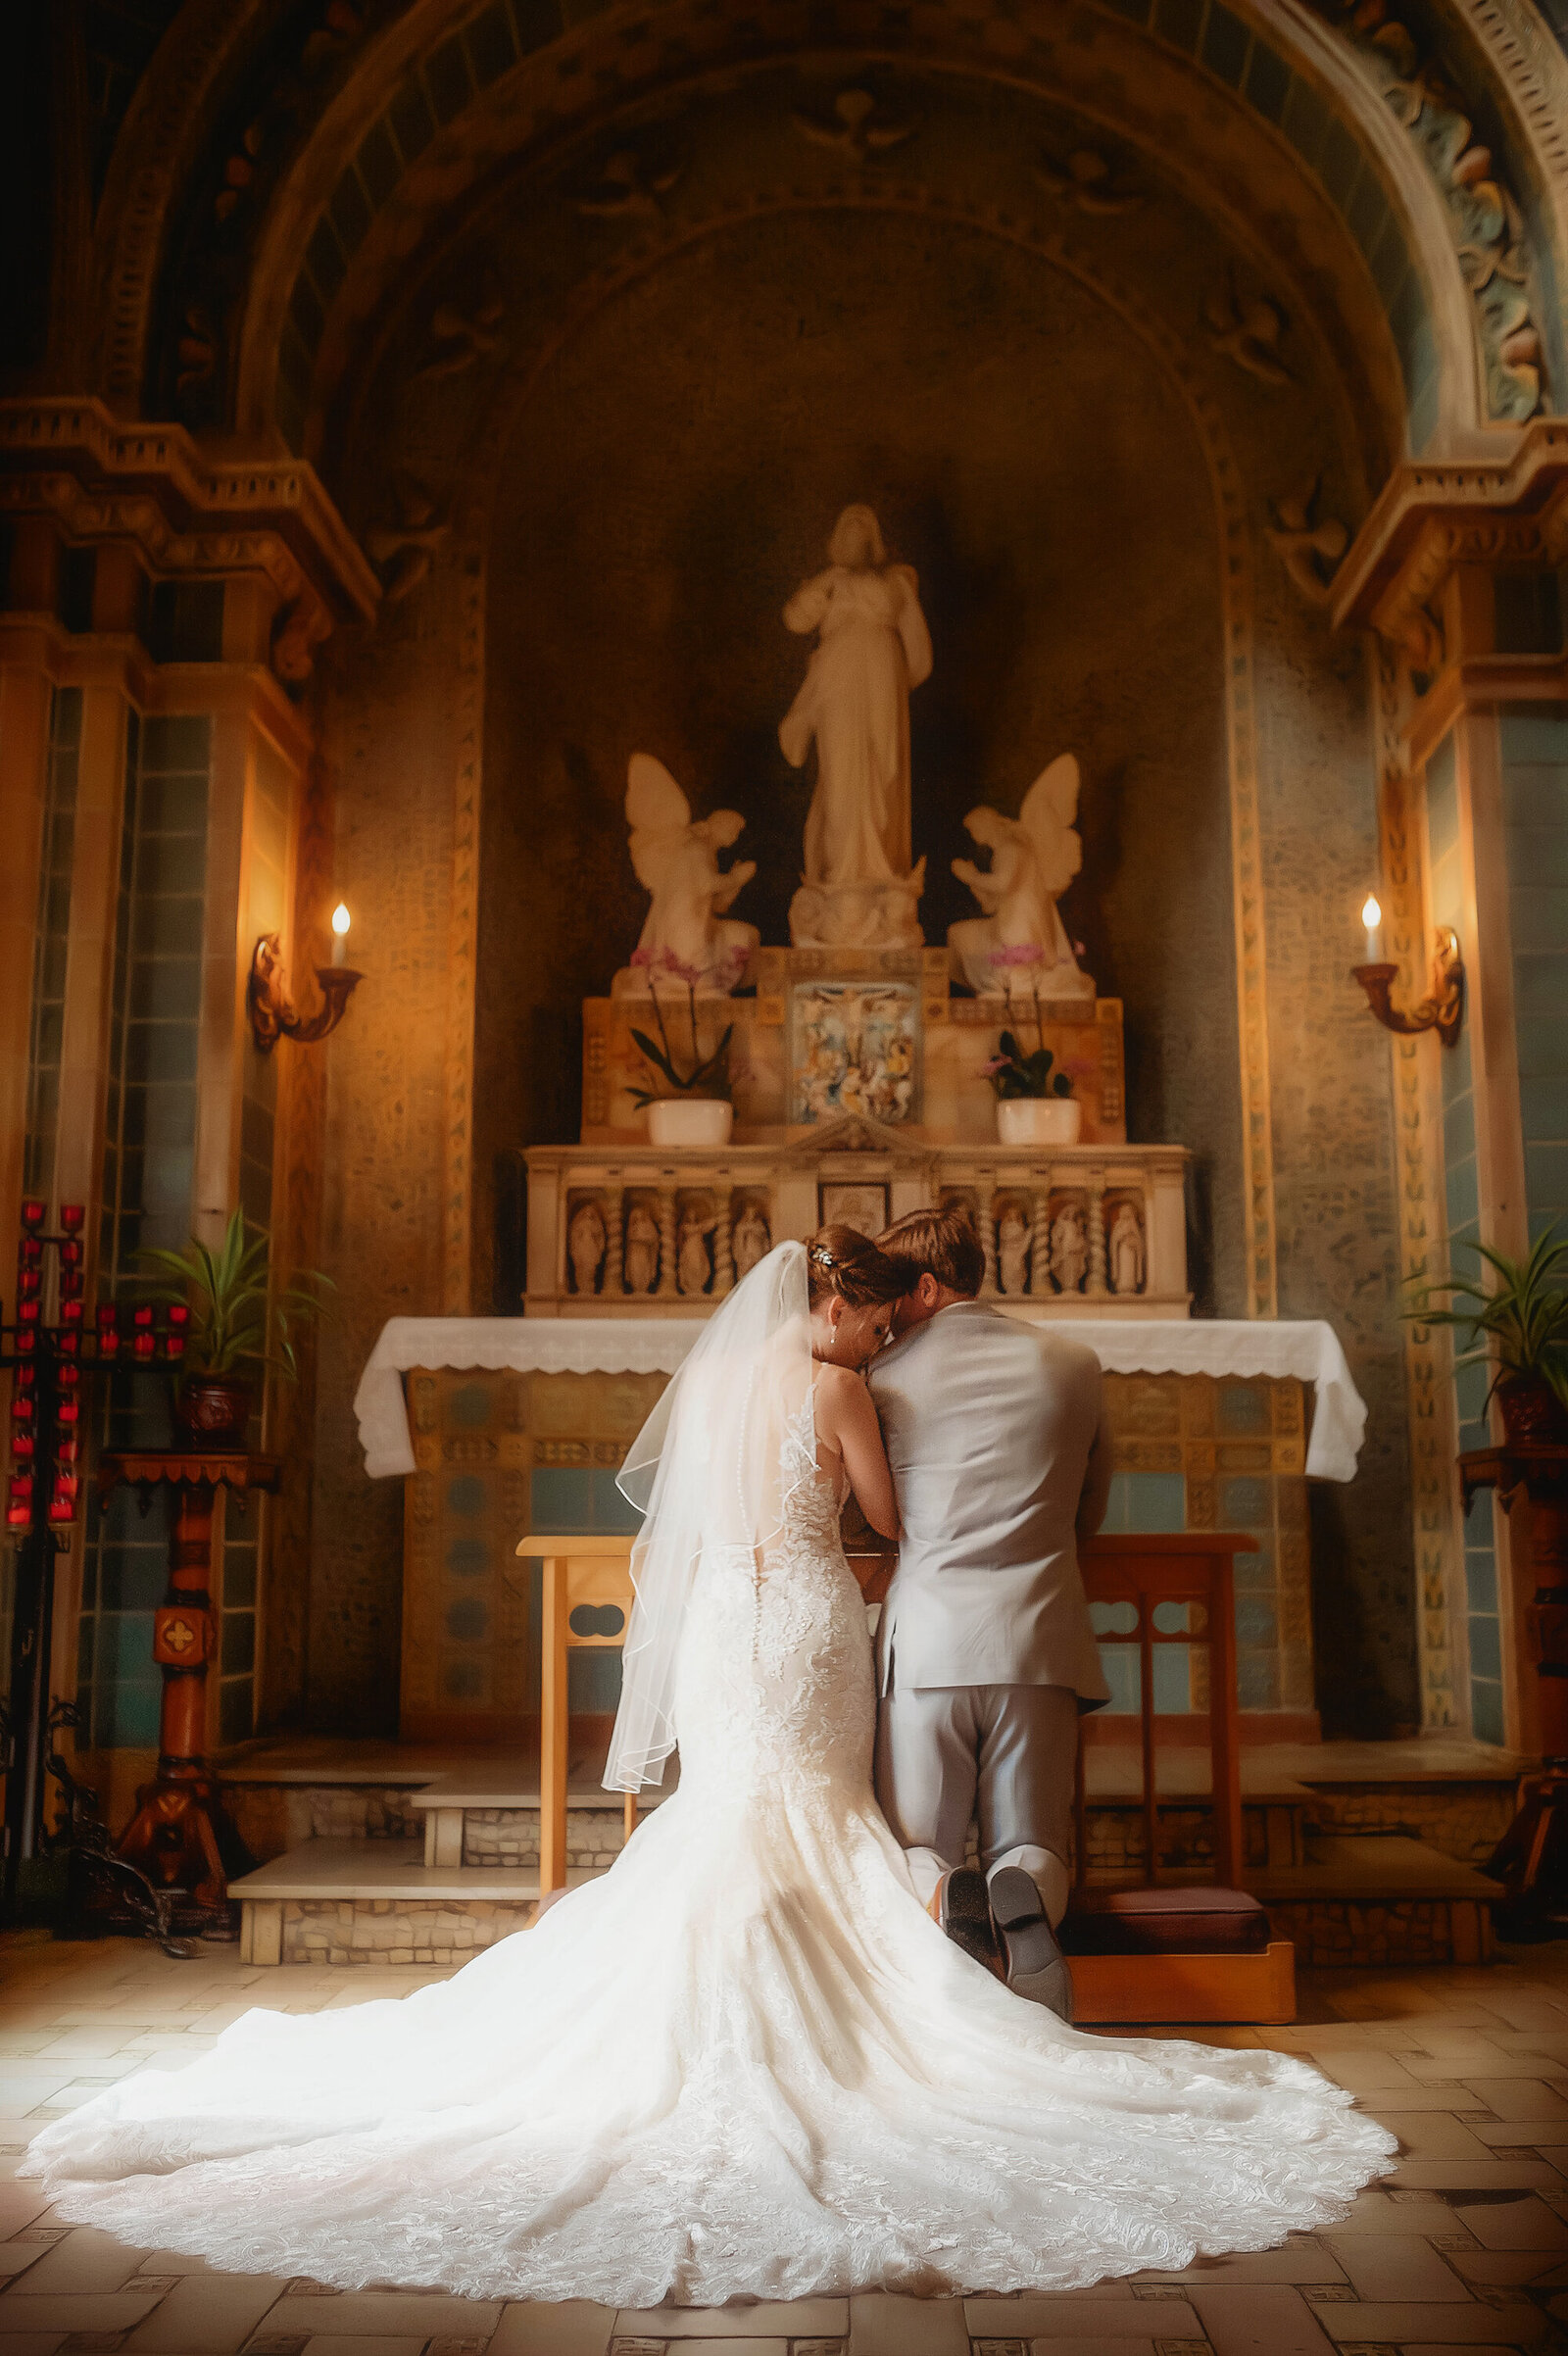 Newlyweds pose for Wedding Photos at Basilica of Saint Lawrence in Asheville, NC.